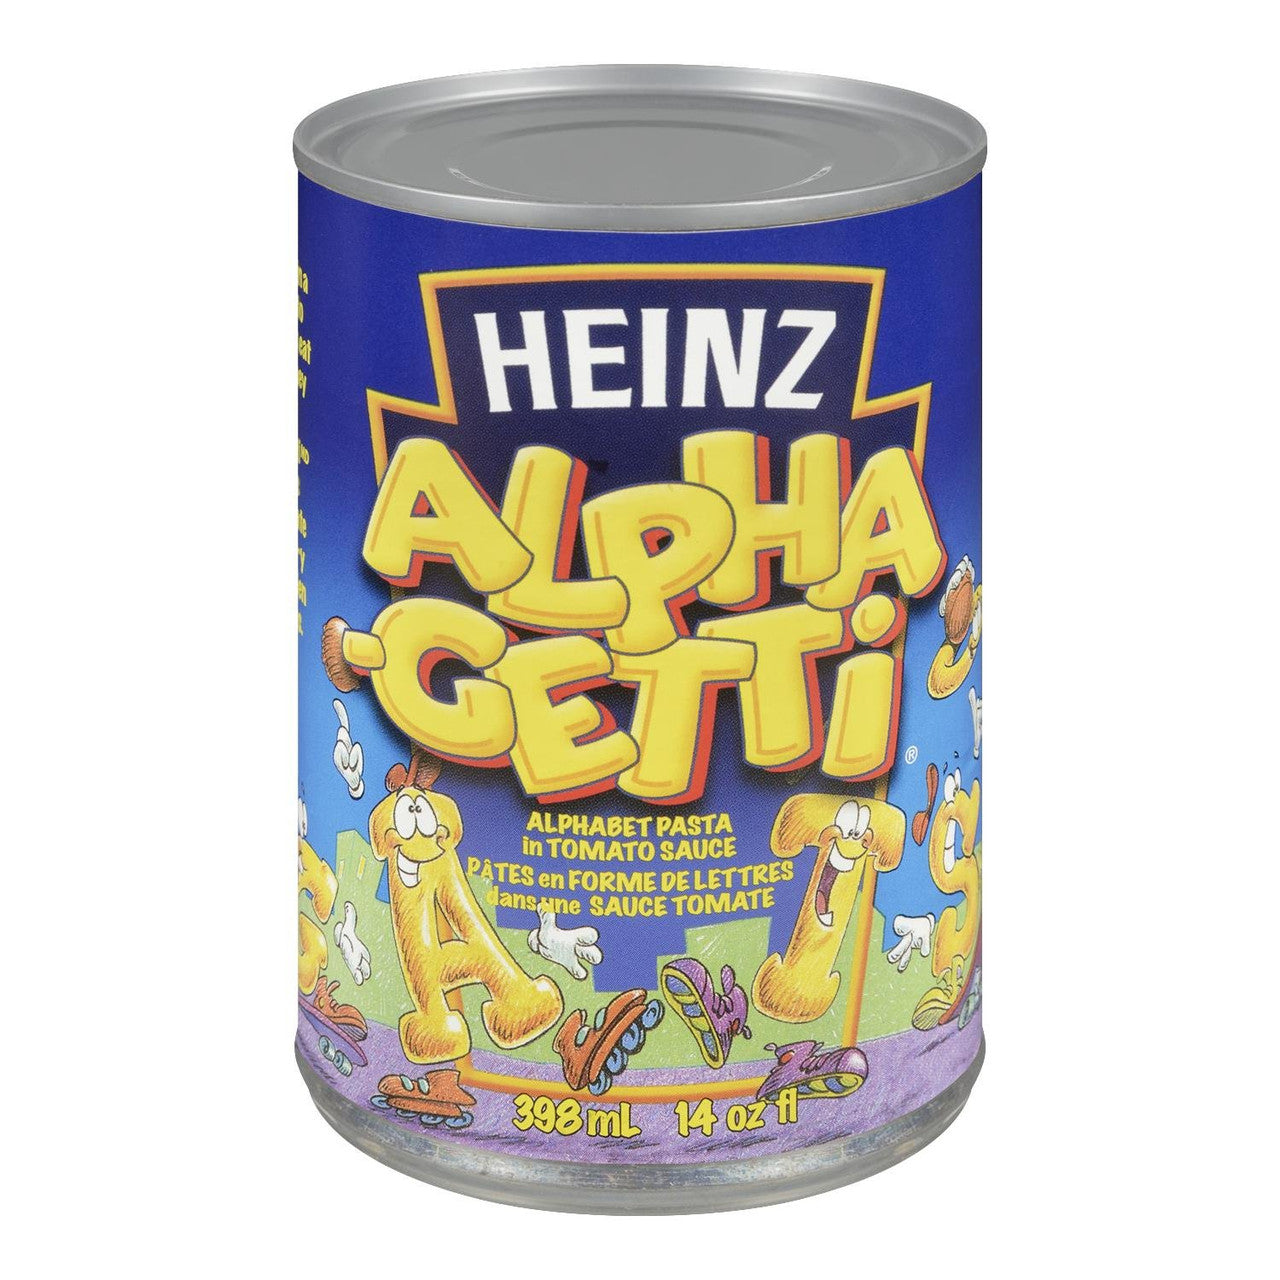 Heinz Alphagetti Pasta 398ml/13.4oz Cans, 24 Pack (Imported from Canada)